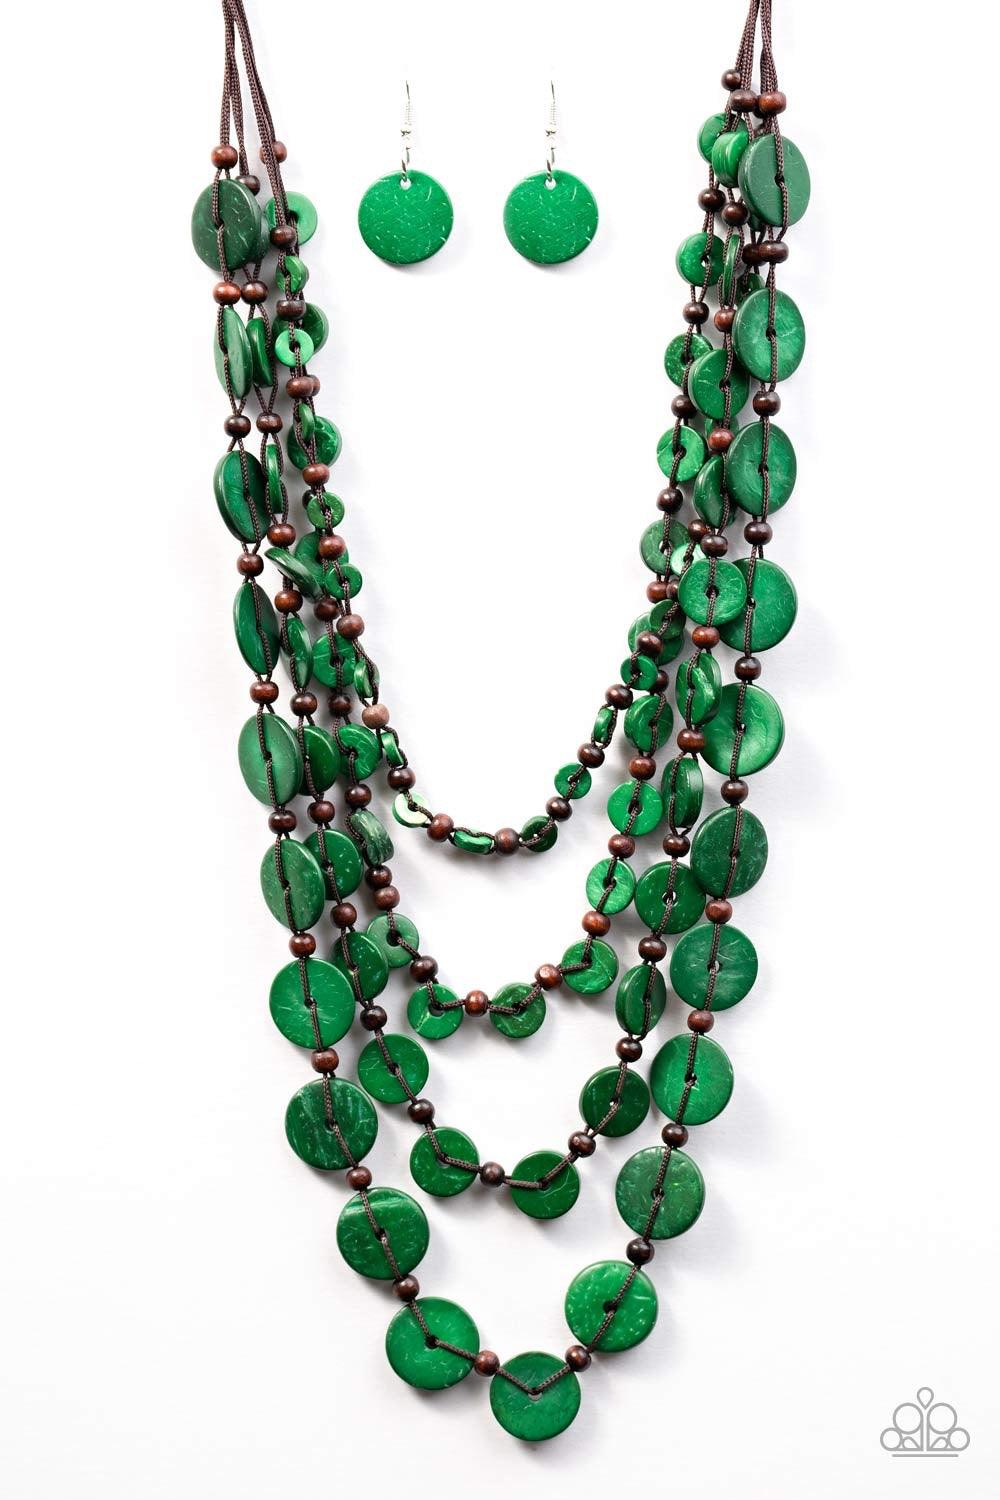 Paparazzi Accessories Fiji Flair - Green Tinted in an iridescent finish, green wooden discs and brown beads are knotted into four summery strands below the collar. The colorful accents gradually increase in size, adding depth to the layered look. Features